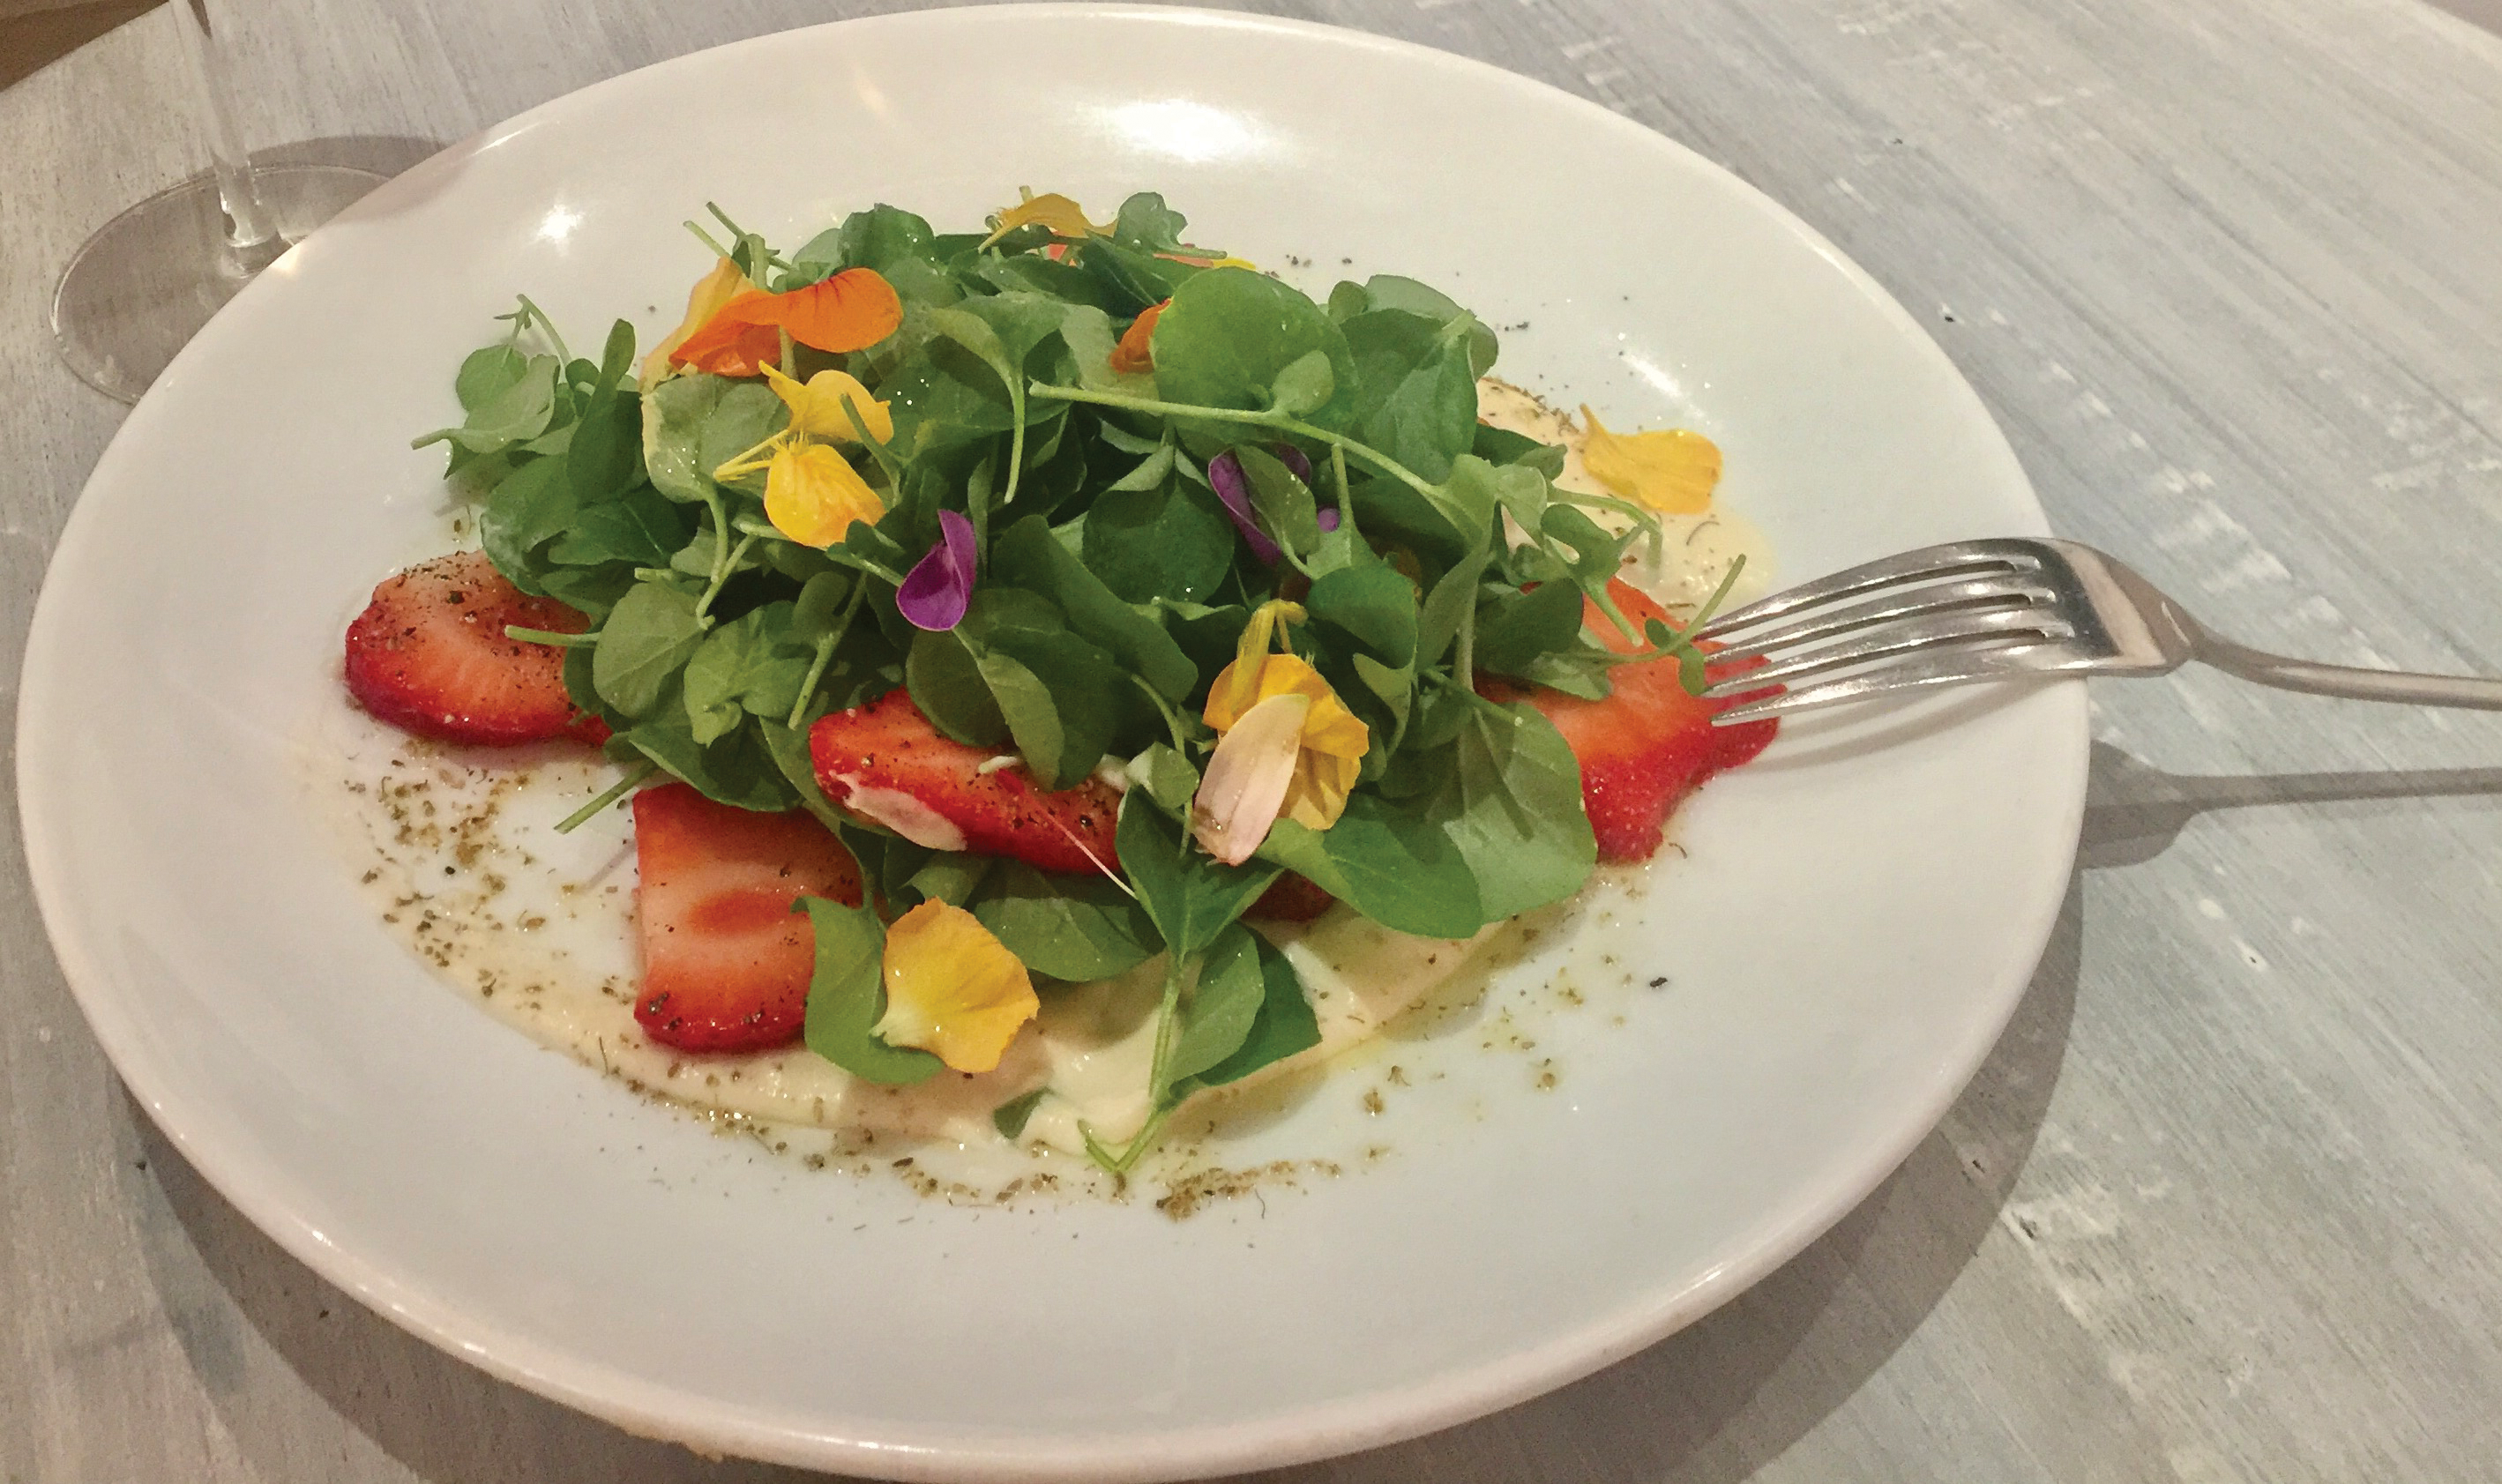 “I am a big fan of the classic spinach and strawberry salad that we serve in late spring through summer at The Cottage,” says Lewis. 